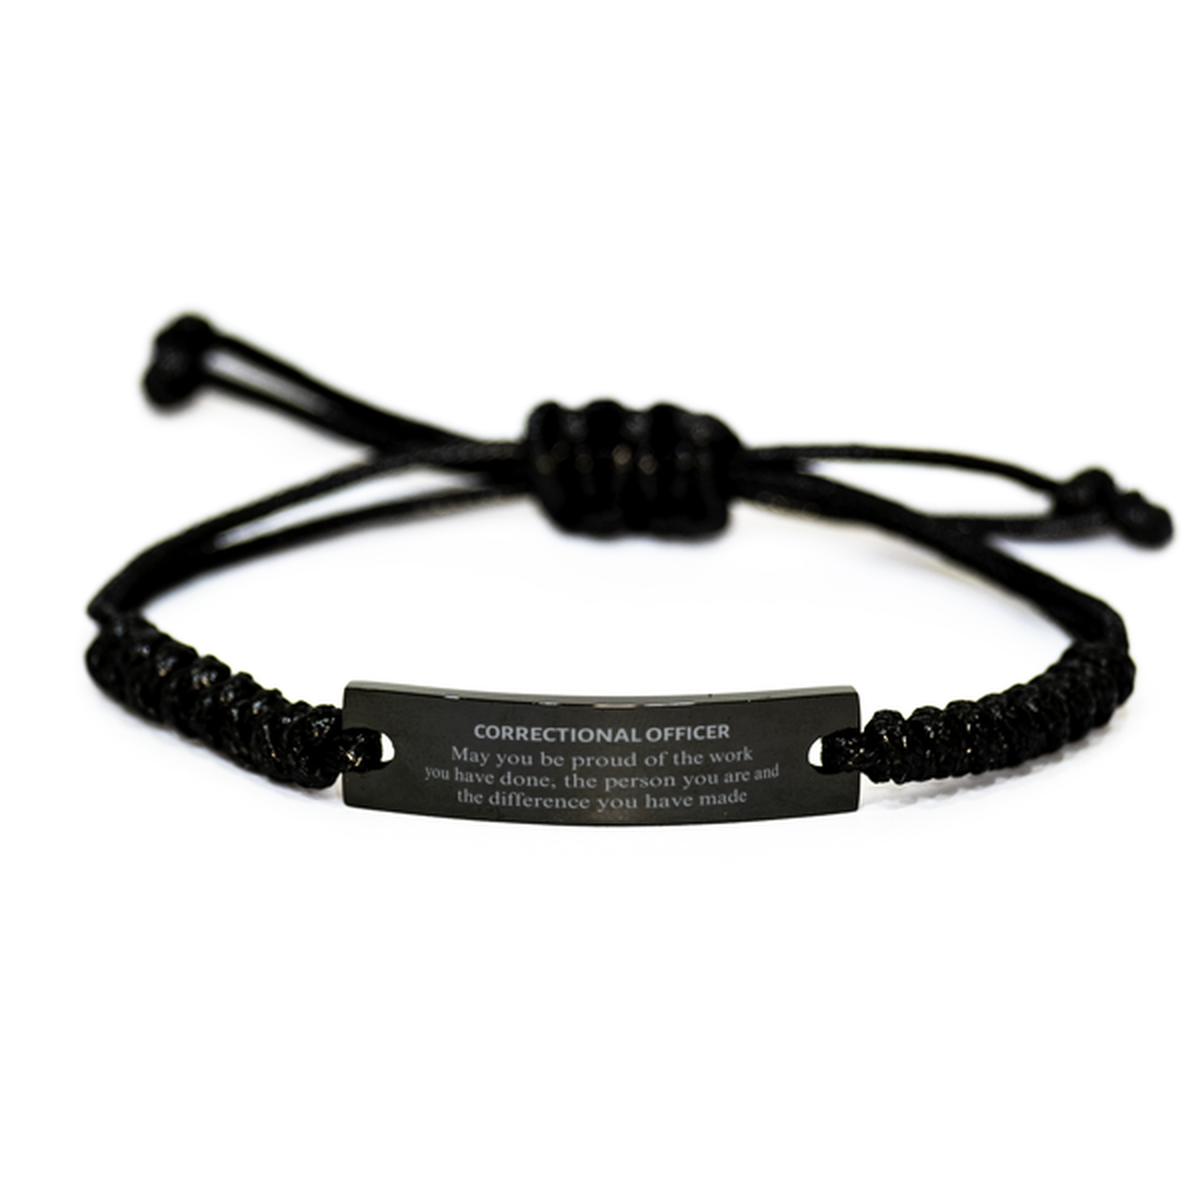 Correctional Officer May you be proud of the work you have done, Retirement Correctional Officer Black Rope Bracelet for Colleague Appreciation Gifts Amazing for Correctional Officer